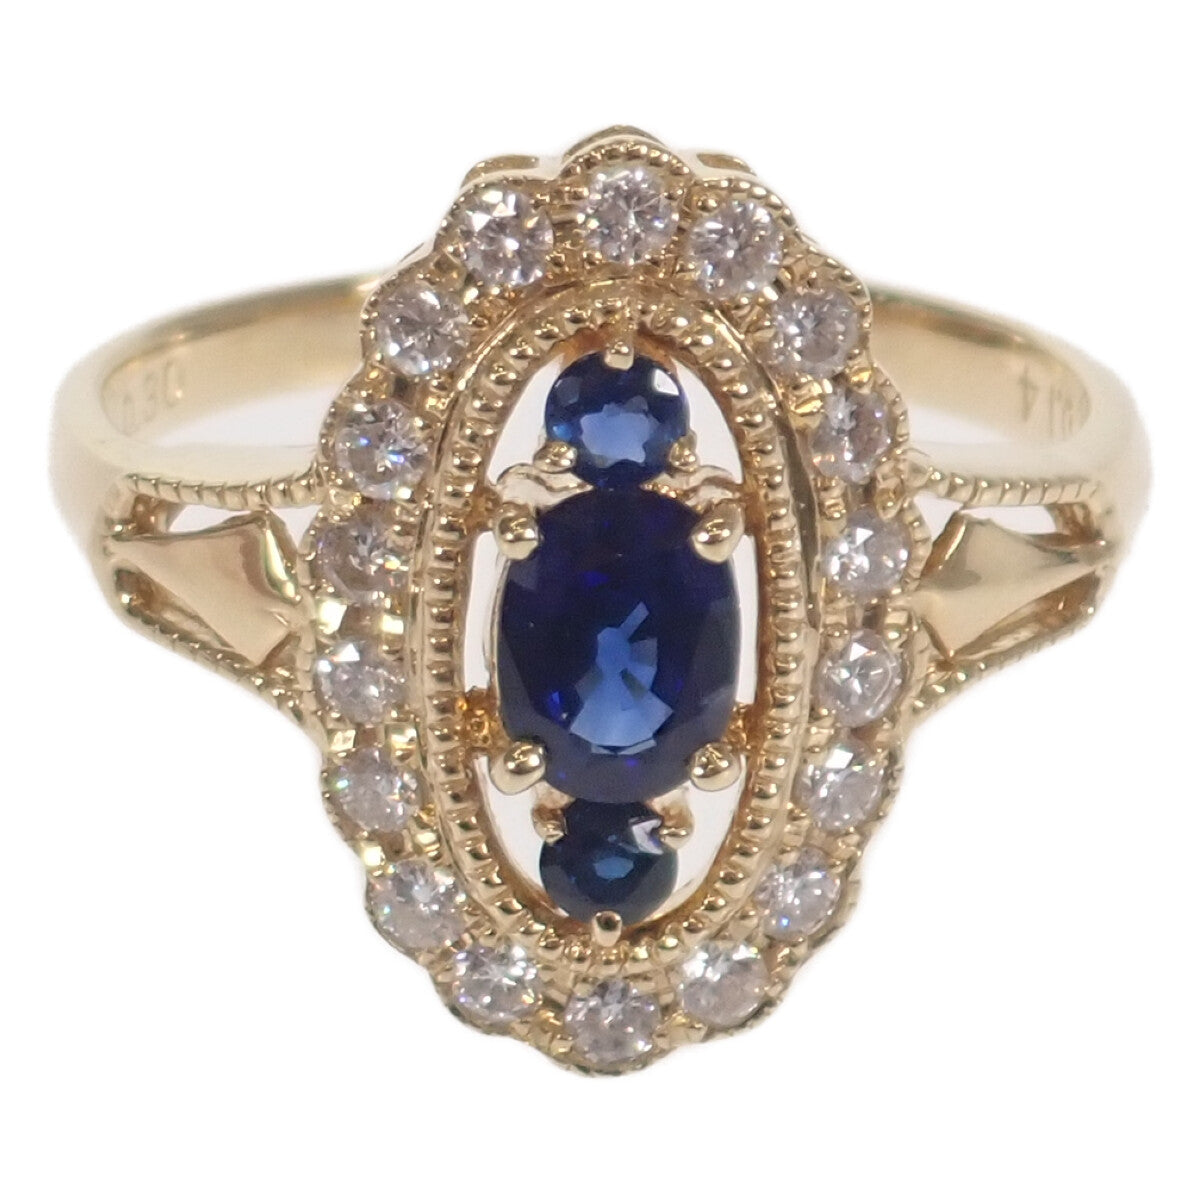 [LuxUness] 18k Gold Diamond & Sapphire Ring Metal Ring in Excellent condition